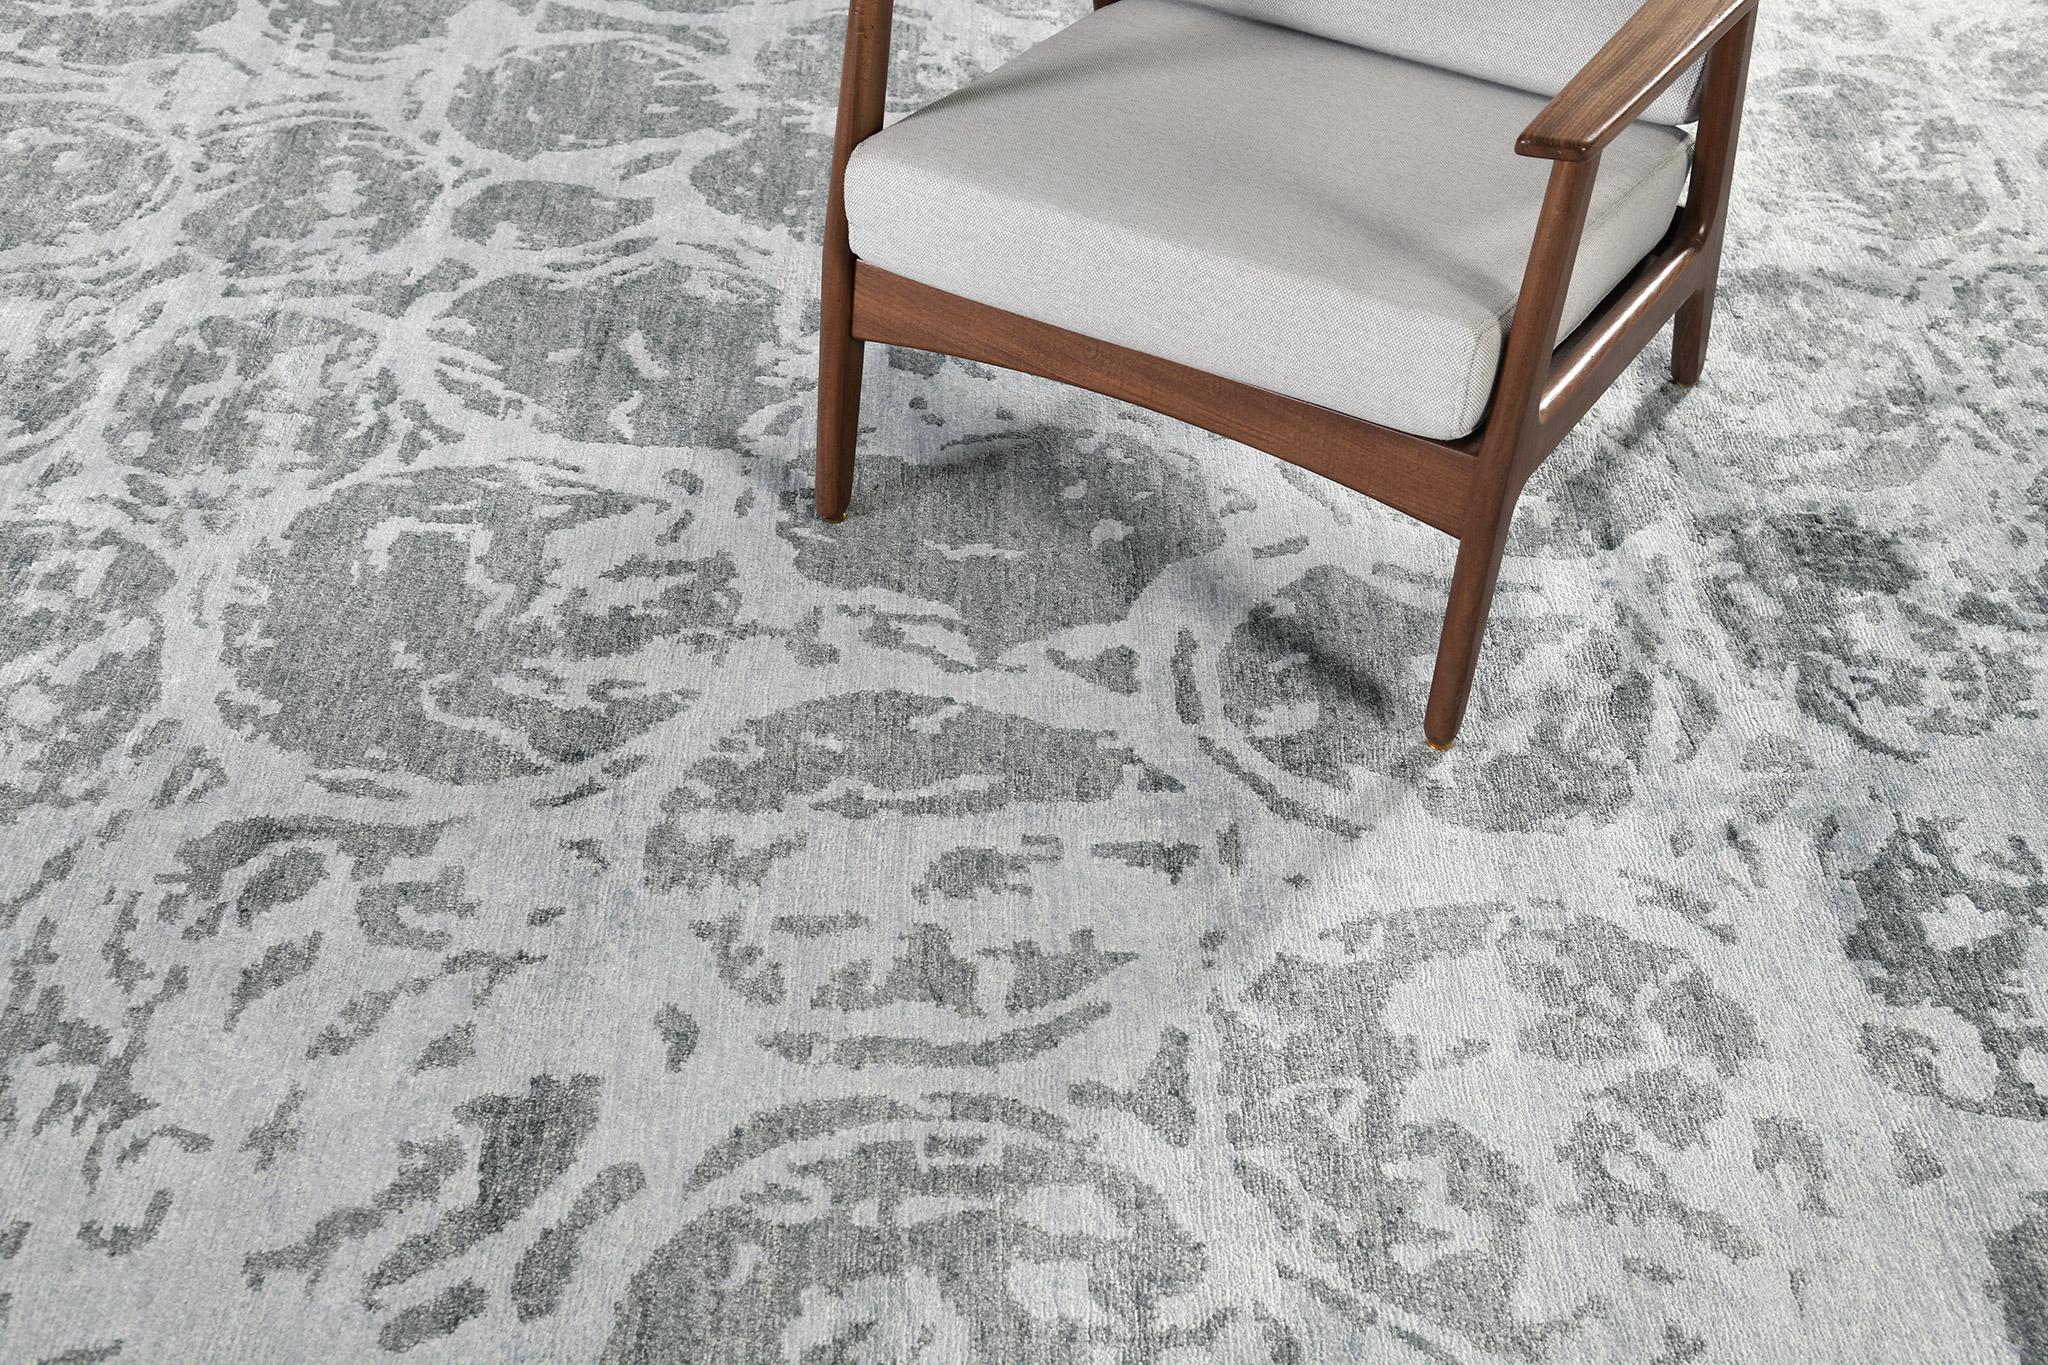 This outstanding modern design from the Elan collection is the quintessence of elegance and refinement. A wool pile weave that intricately weaves over the ash gray variegated ground with a profusion of blue and ash elements set. A fashionable